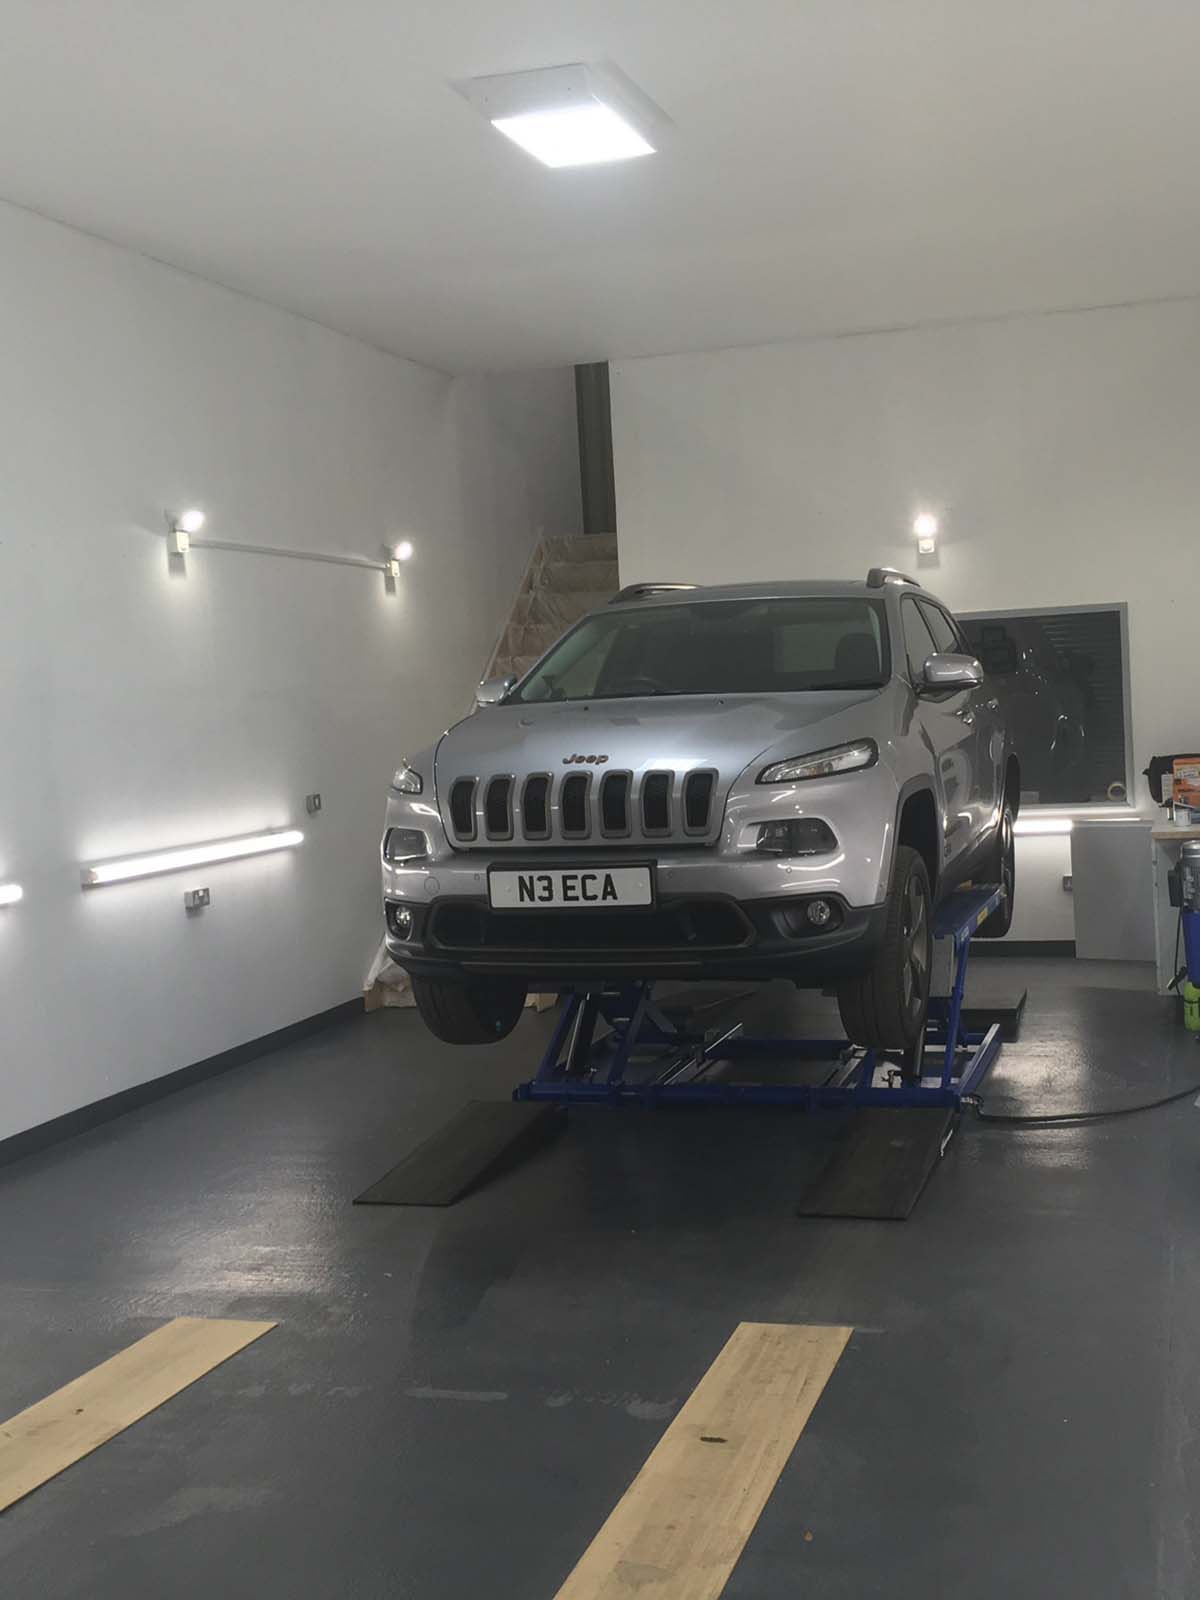 garage interior with lifted car